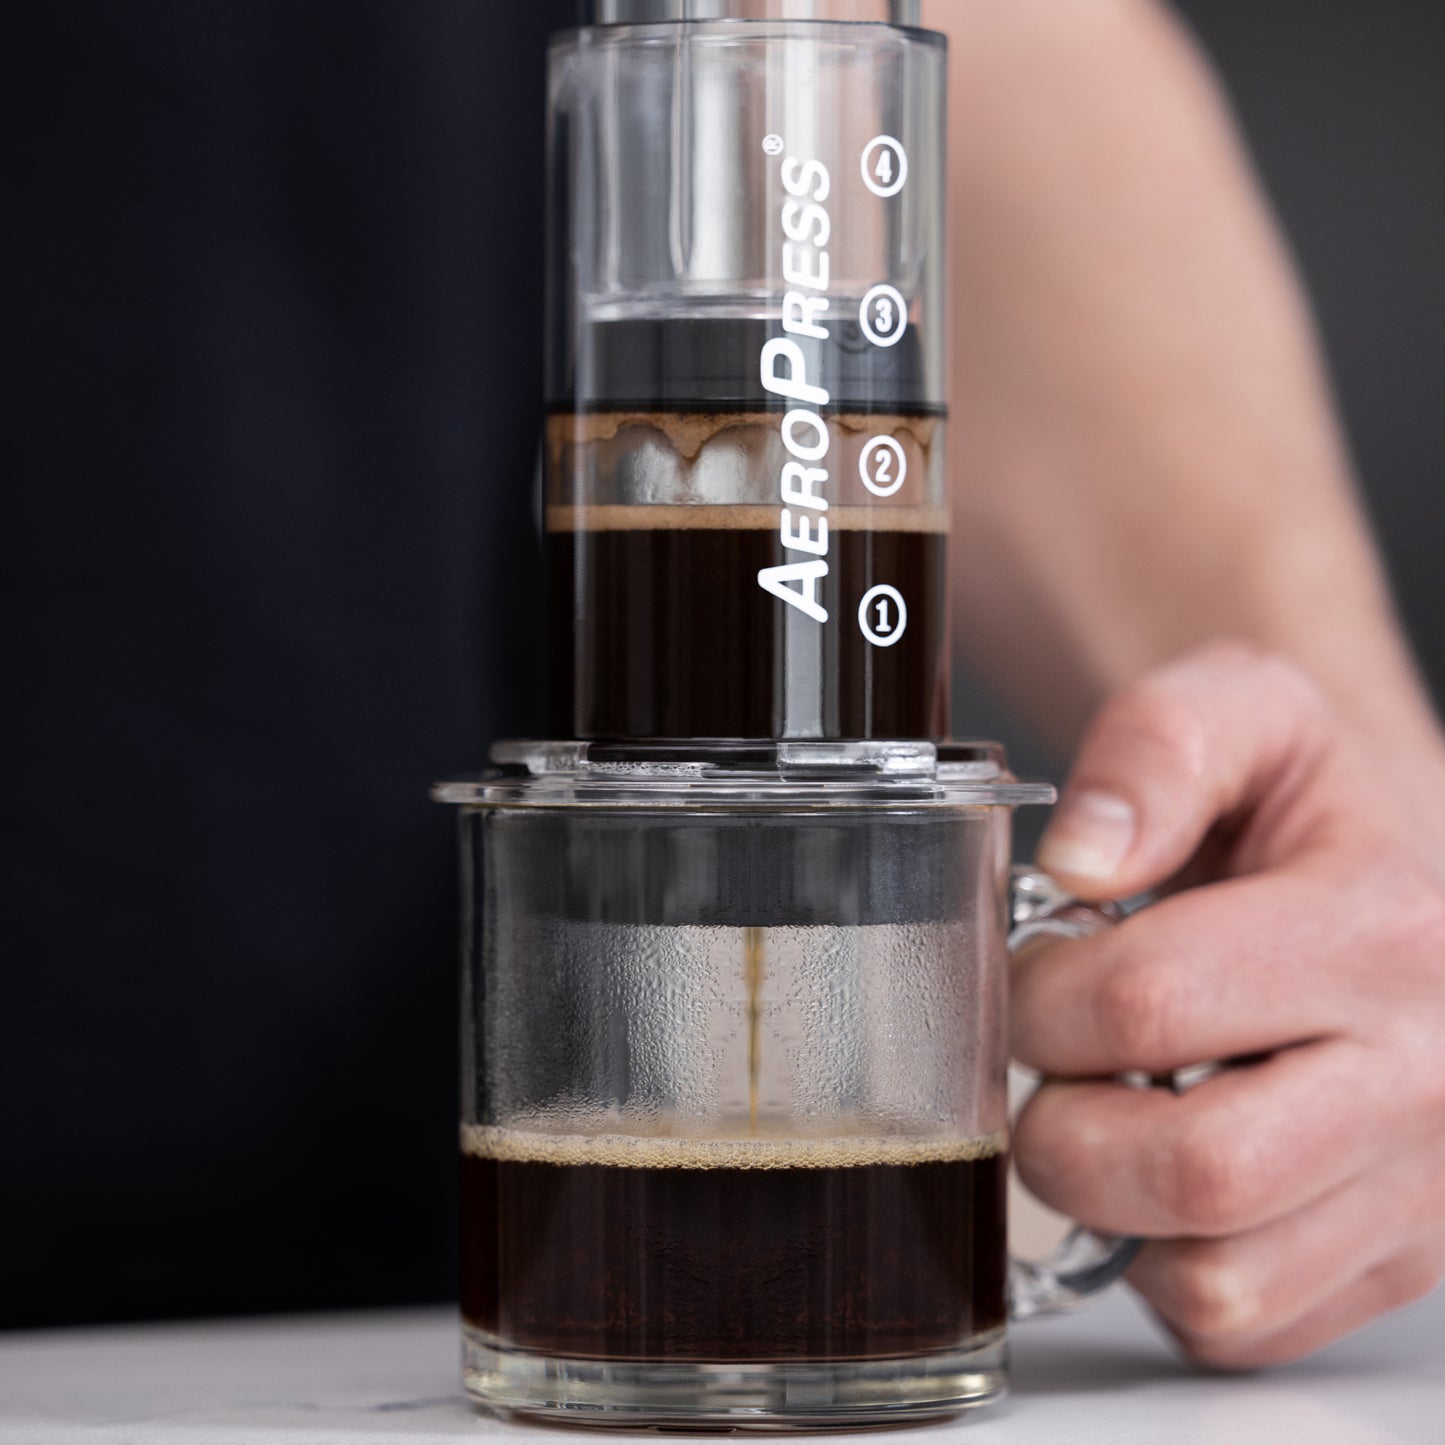 AeroPress Clear Coffee Maker - built tougher for travelling